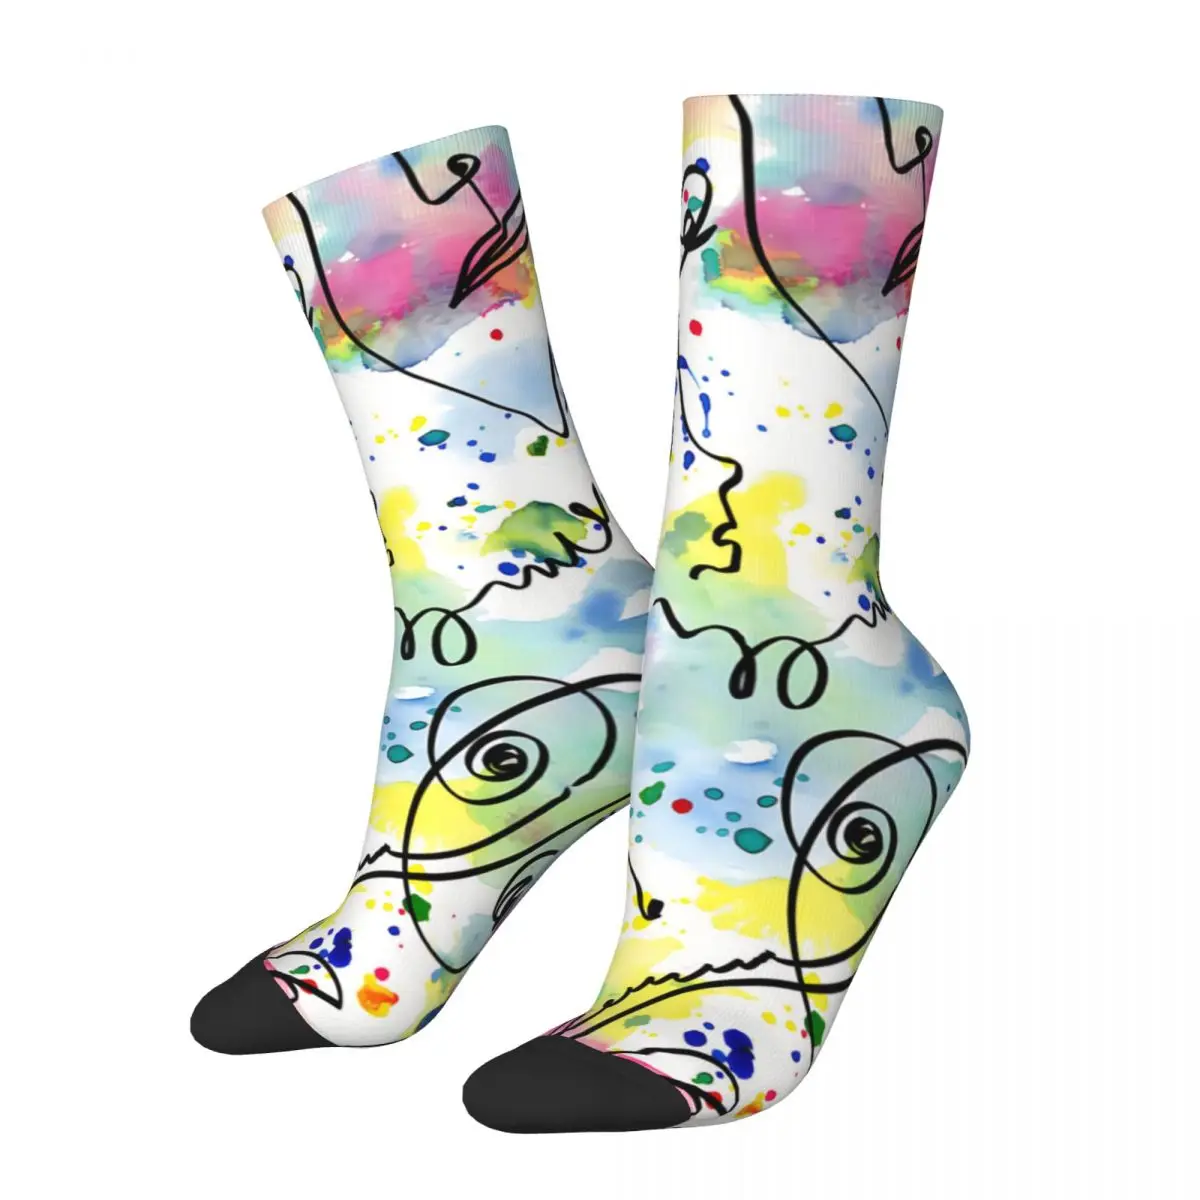 

Men's Socks Line Faces With Watercolor Splashes Ink Retro Graffiti Art Pattern Hip Hop Crazy Crew Sock Gift Pattern Printed